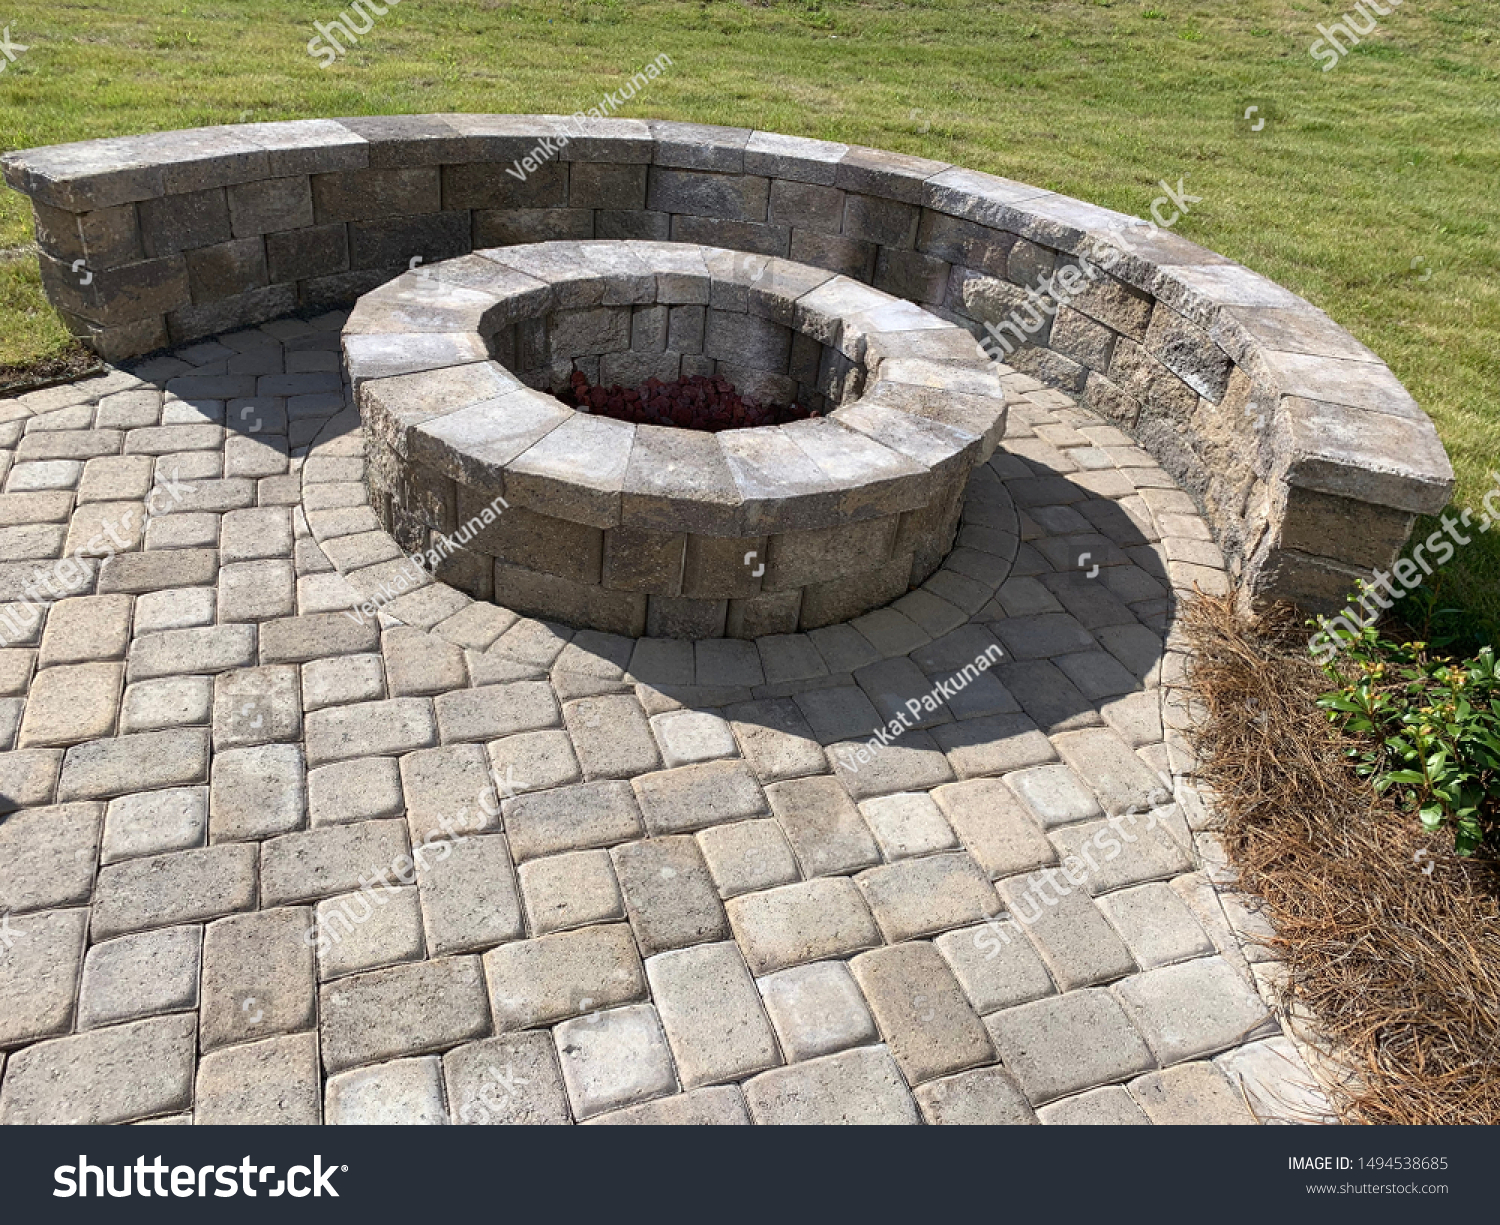 Backyard paver patio with stones and fire place #1494538685